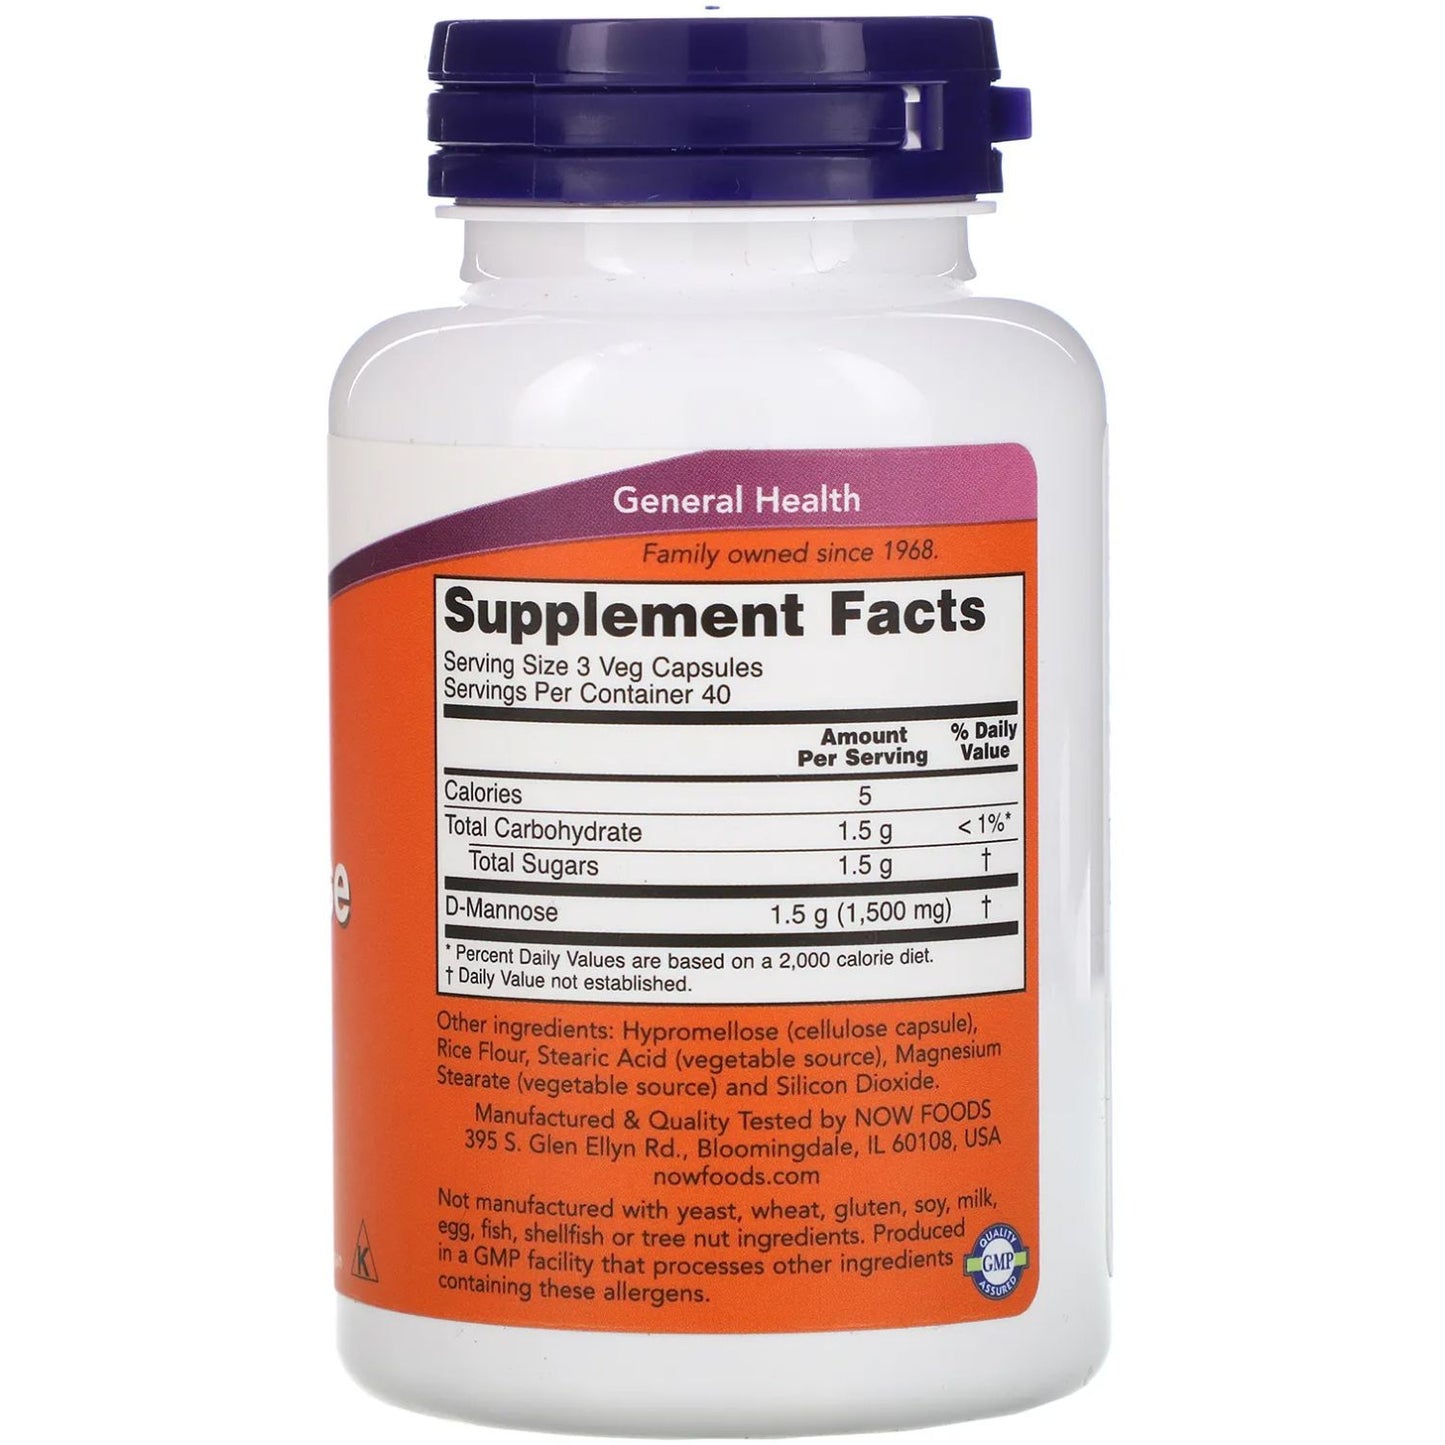 Now Foods D-Mannose 500mg Vegetable Capsules 120's